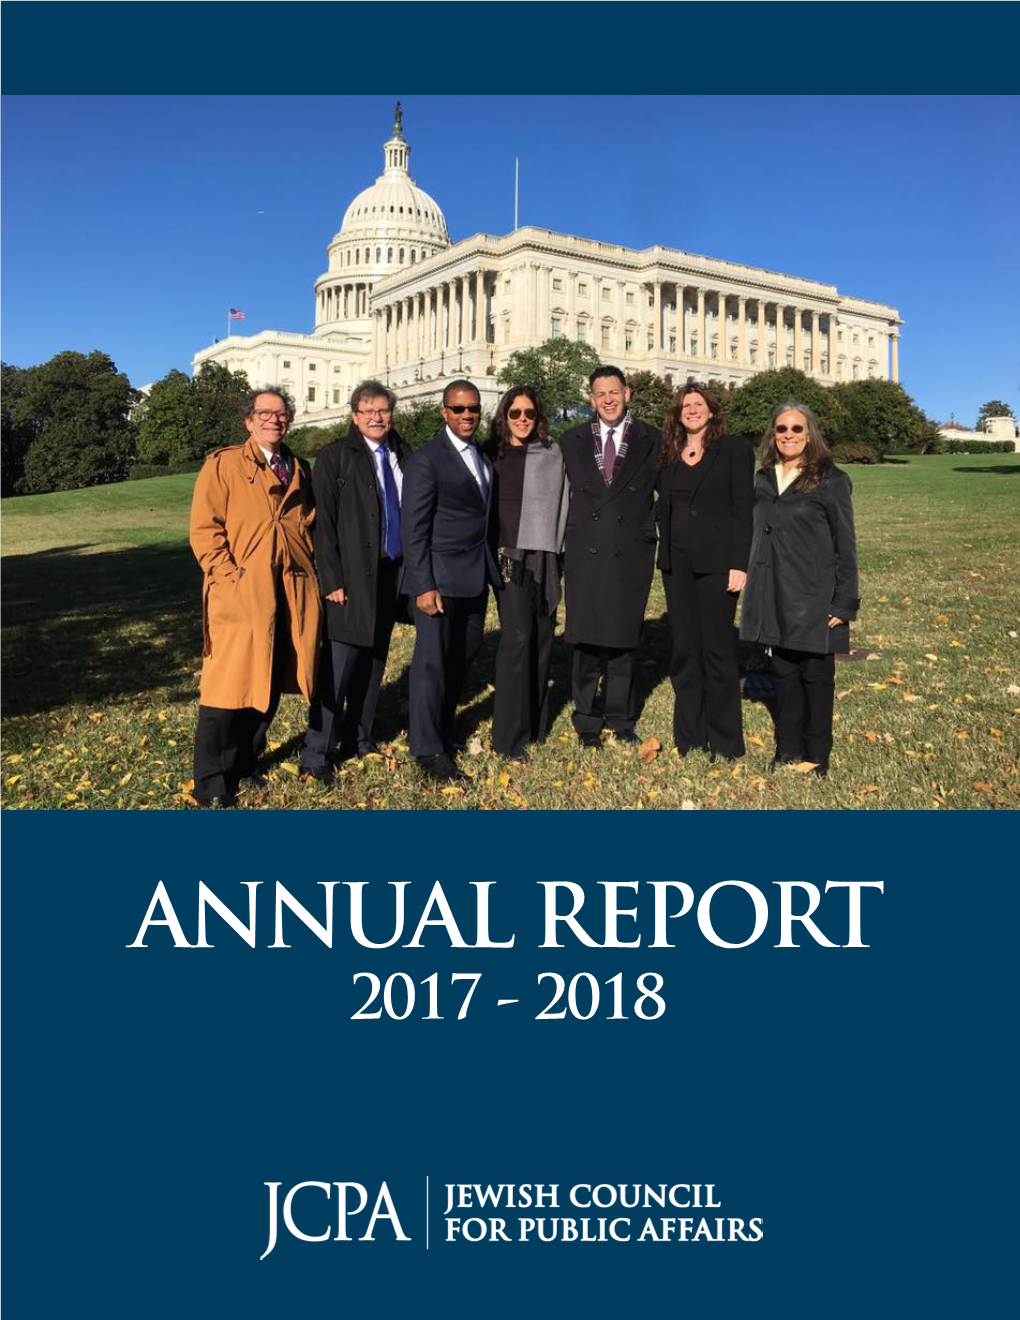 Gun Violence, Criminal Justice Reform, Immigration As Well As the International Fund for Israeli-Palestinian Peace, for Which There Was an Issue Brief and an Overview